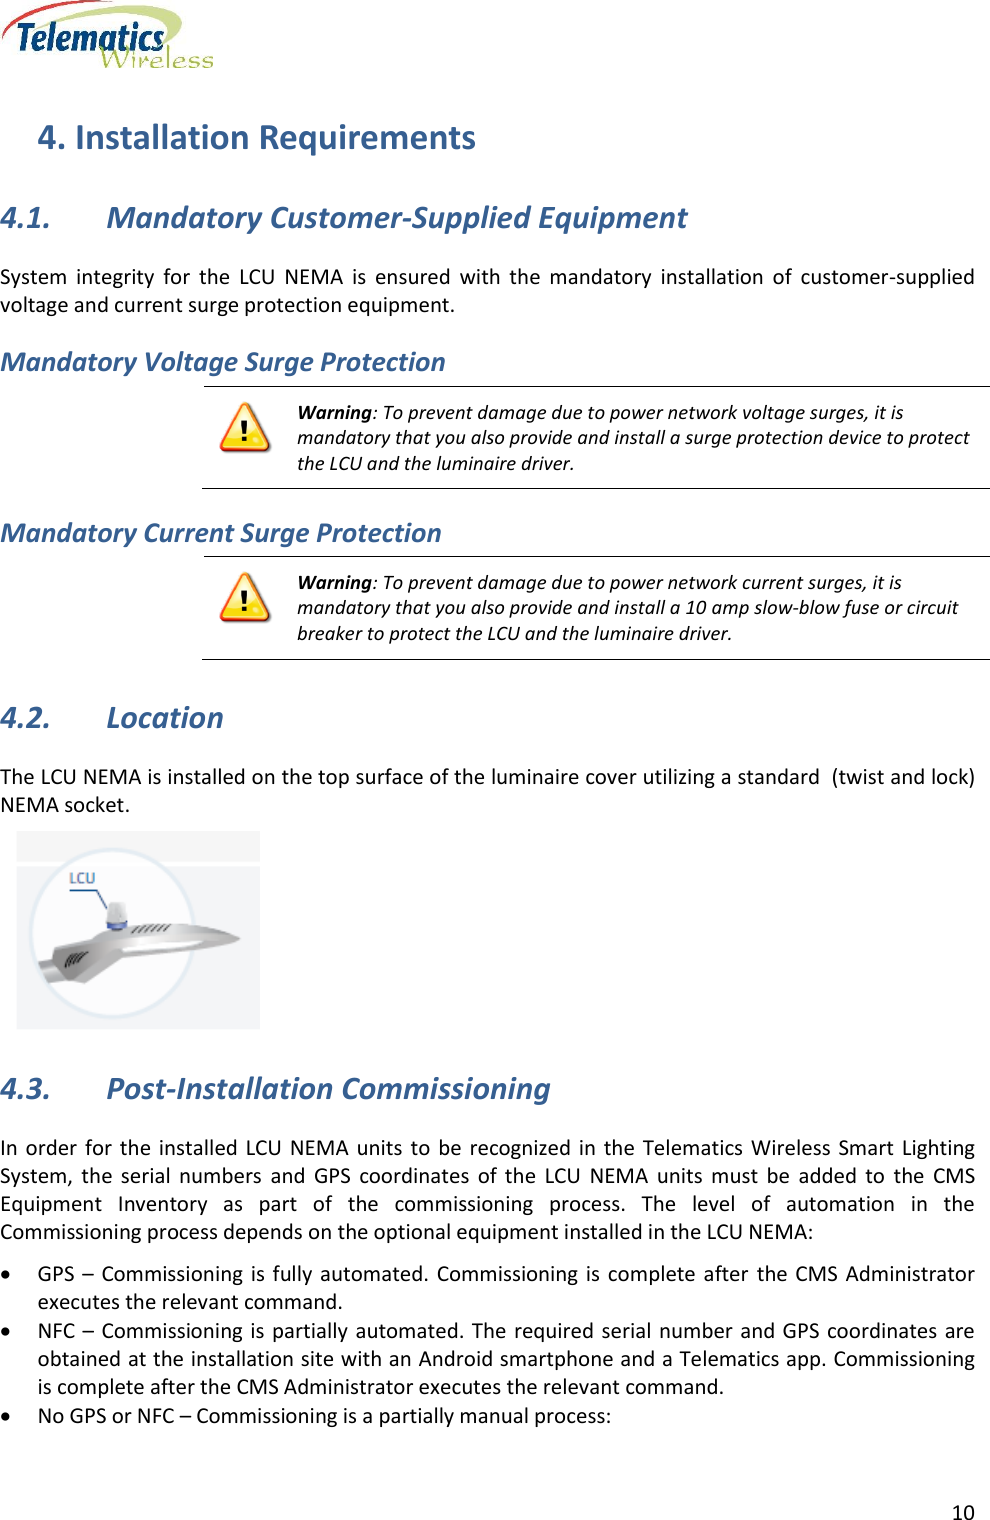      10  4. Installation Requirements 4.1. Mandatory Customer-Supplied Equipment  System  integrity  for  the  LCU  NEMA  is  ensured  with  the  mandatory  installation  of  customer-supplied voltage and current surge protection equipment. Mandatory Voltage Surge Protection  Warning: To prevent damage due to power network voltage surges, it is mandatory that you also provide and install a surge protection device to protect the LCU and the luminaire driver. Mandatory Current Surge Protection  Warning: To prevent damage due to power network current surges, it is mandatory that you also provide and install a 10 amp slow-blow fuse or circuit breaker to protect the LCU and the luminaire driver. 4.2. Location The LCU NEMA is installed on the top surface of the luminaire cover utilizing a standard  (twist and lock) NEMA socket.  4.3. Post-Installation Commissioning In order for  the  installed  LCU  NEMA  units  to be recognized in  the  Telematics Wireless Smart Lighting System,  the  serial  numbers  and  GPS  coordinates  of  the  LCU  NEMA  units  must  be  added  to  the  CMS Equipment  Inventory  as  part  of  the  commissioning  process.  The  level  of  automation  in  the Commissioning process depends on the optional equipment installed in the LCU NEMA:  GPS –  Commissioning is  fully automated.  Commissioning  is  complete  after  the CMS  Administrator executes the relevant command.  NFC –  Commissioning is  partially automated. The required serial number and GPS coordinates are obtained at the installation site with an Android smartphone and a Telematics app. Commissioning is complete after the CMS Administrator executes the relevant command.  No GPS or NFC – Commissioning is a partially manual process:  